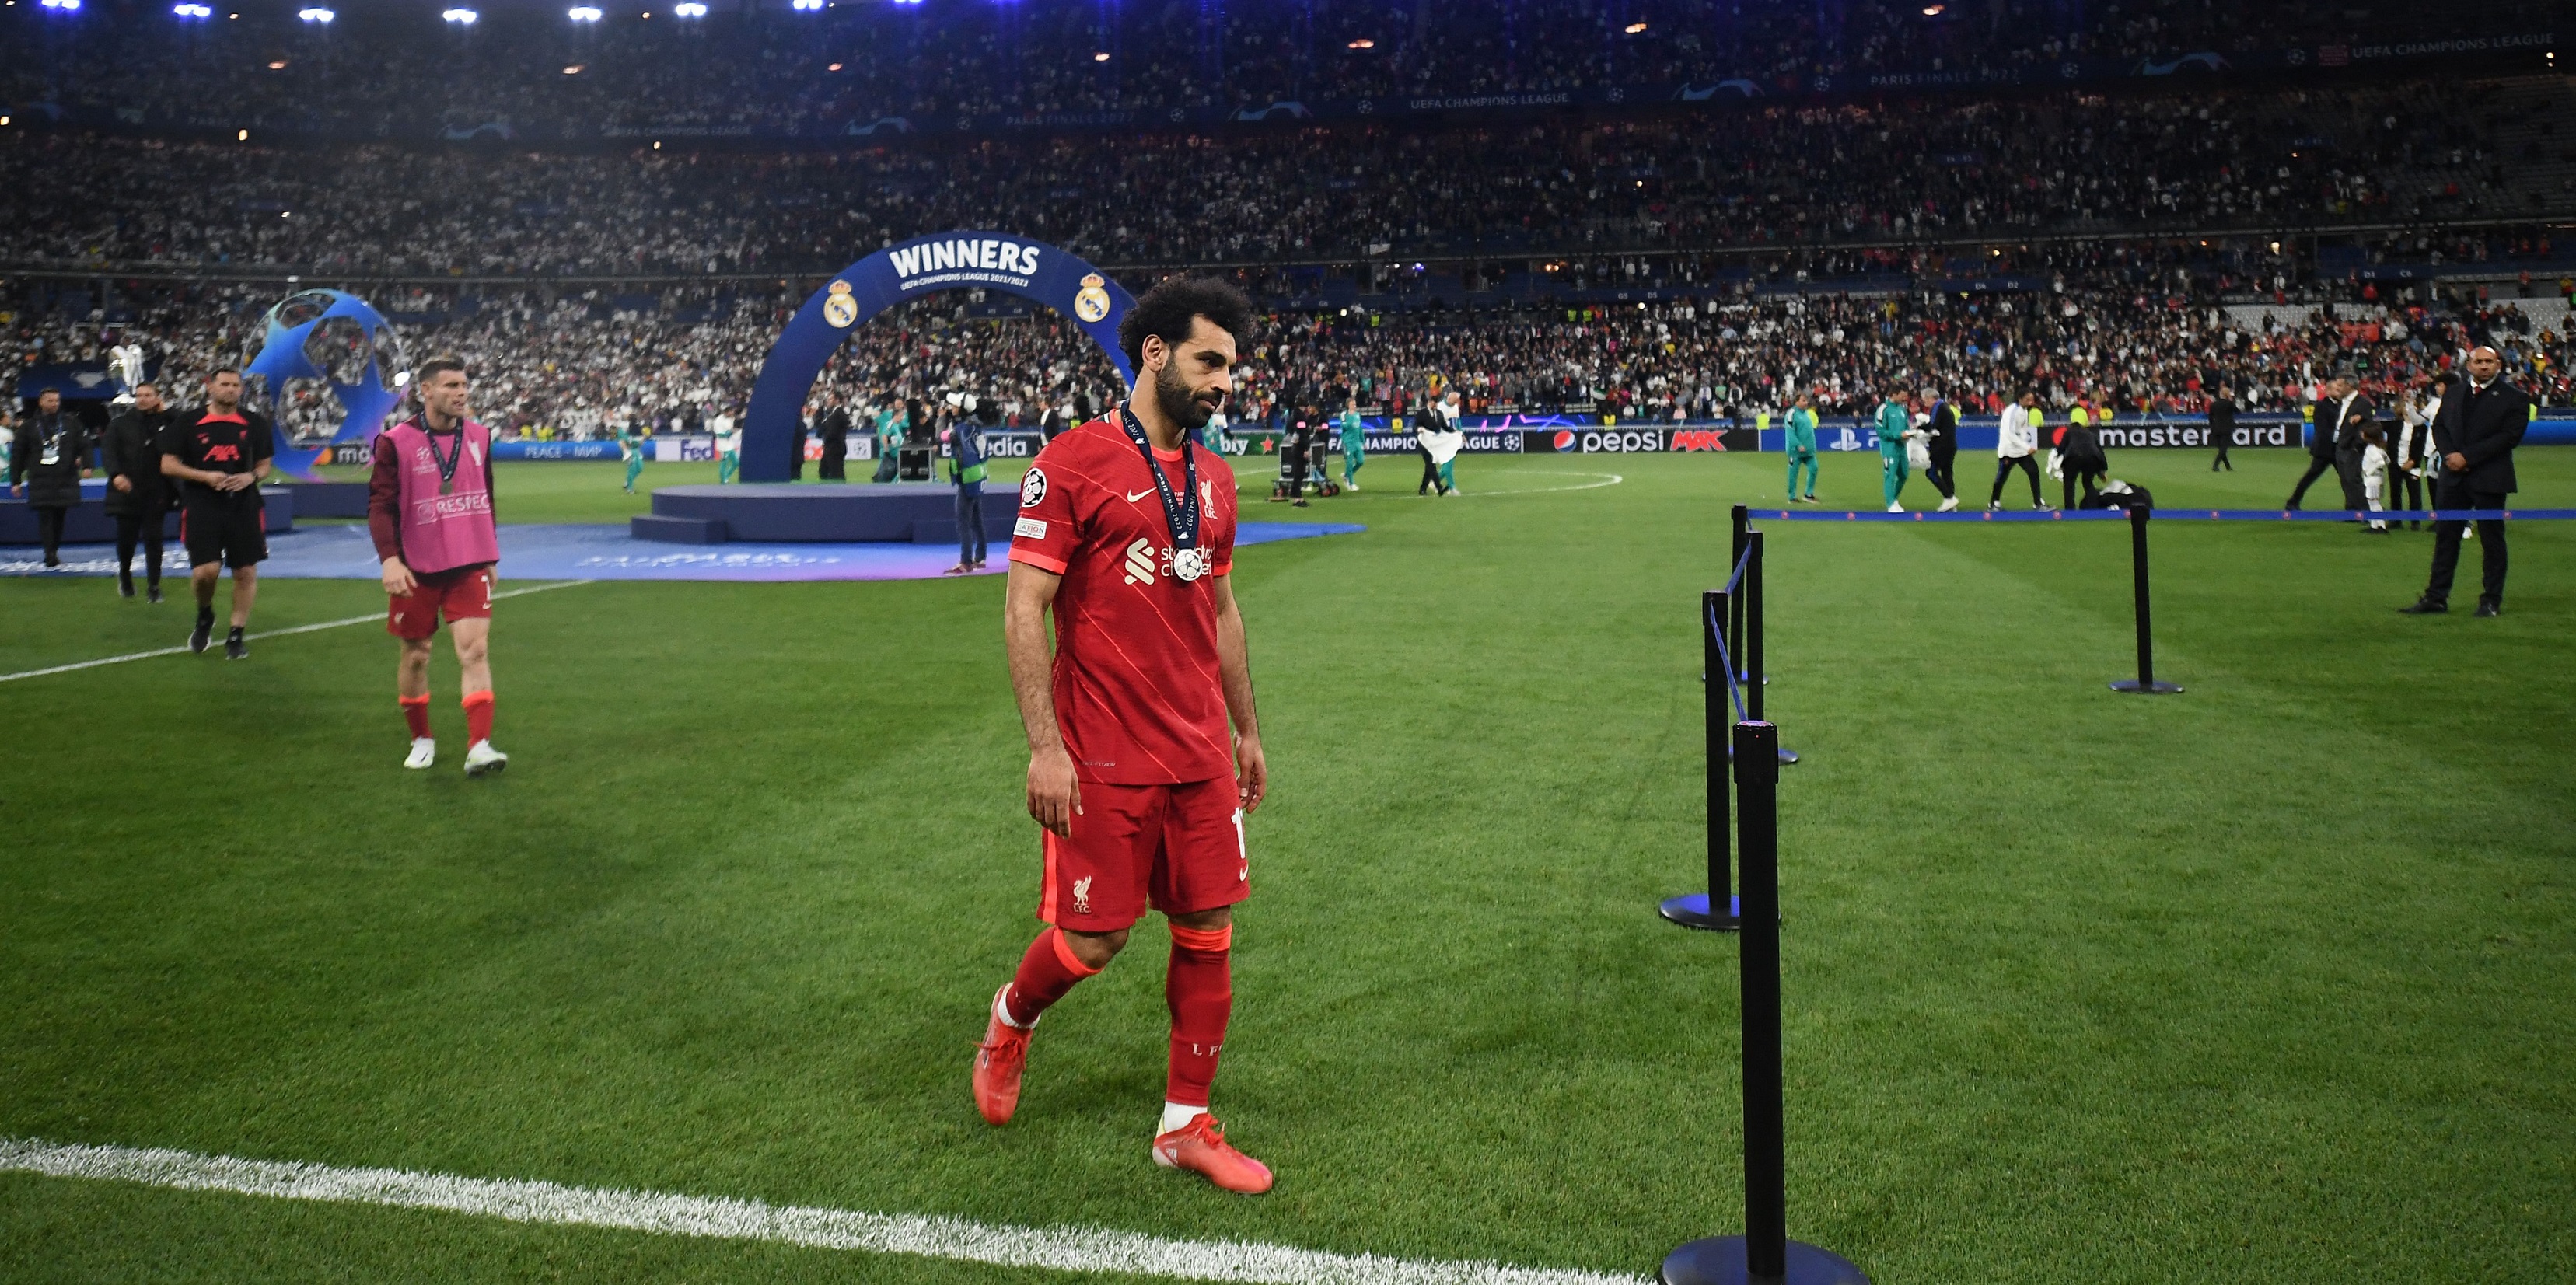 (Image) ‘I will never forget…’ – Salah’s heartbreaking Champions League final message to Liverpool fans